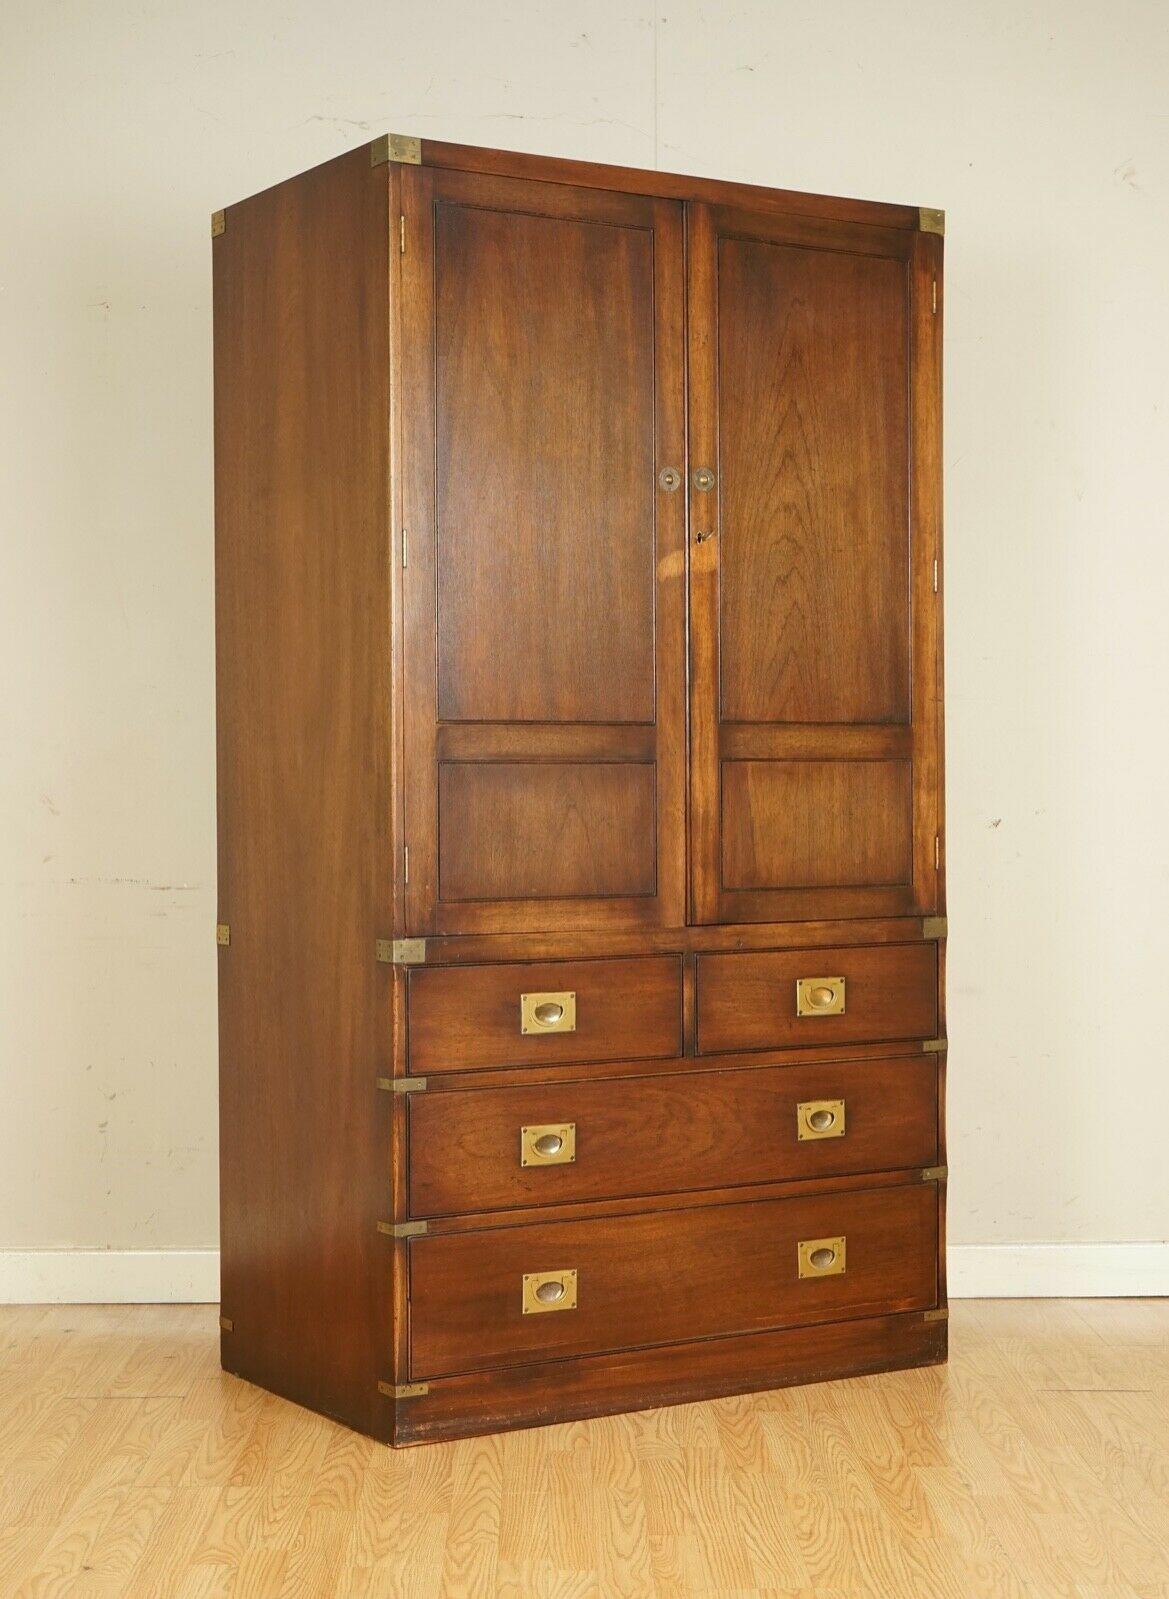 Stunning Bevan and Funnel Military Campaign Wardrobe/Cabinet with Brass Handles 7